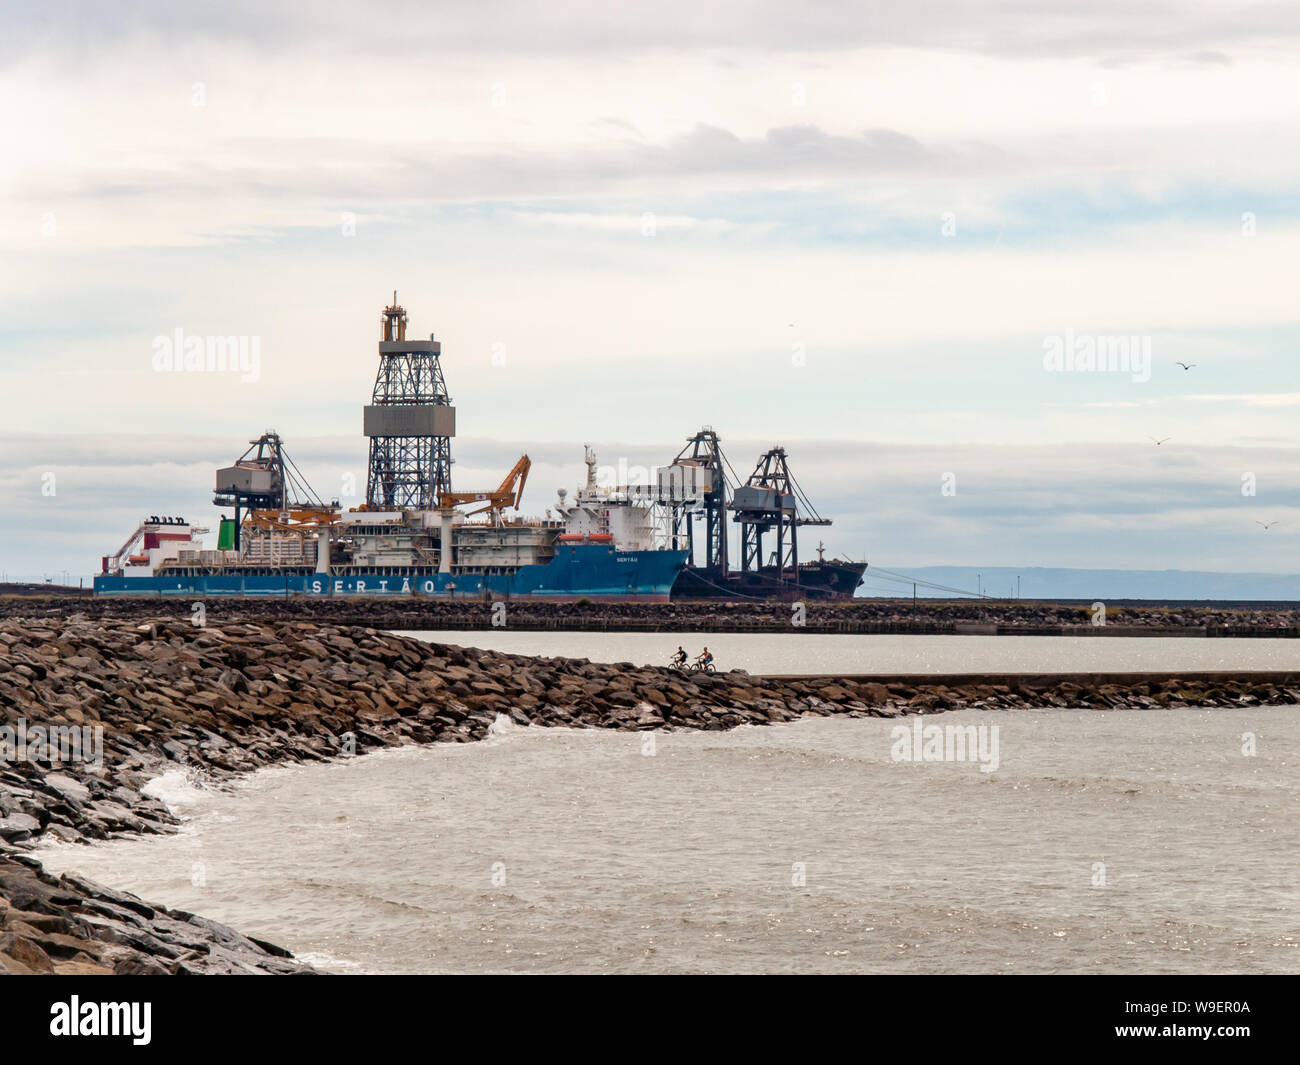 The deep water drilling vessel Sertao at dock in Port Talbot in South Wales. Two mountain bike riders can be seen on the breakwater. Wales, UK Stock Photo